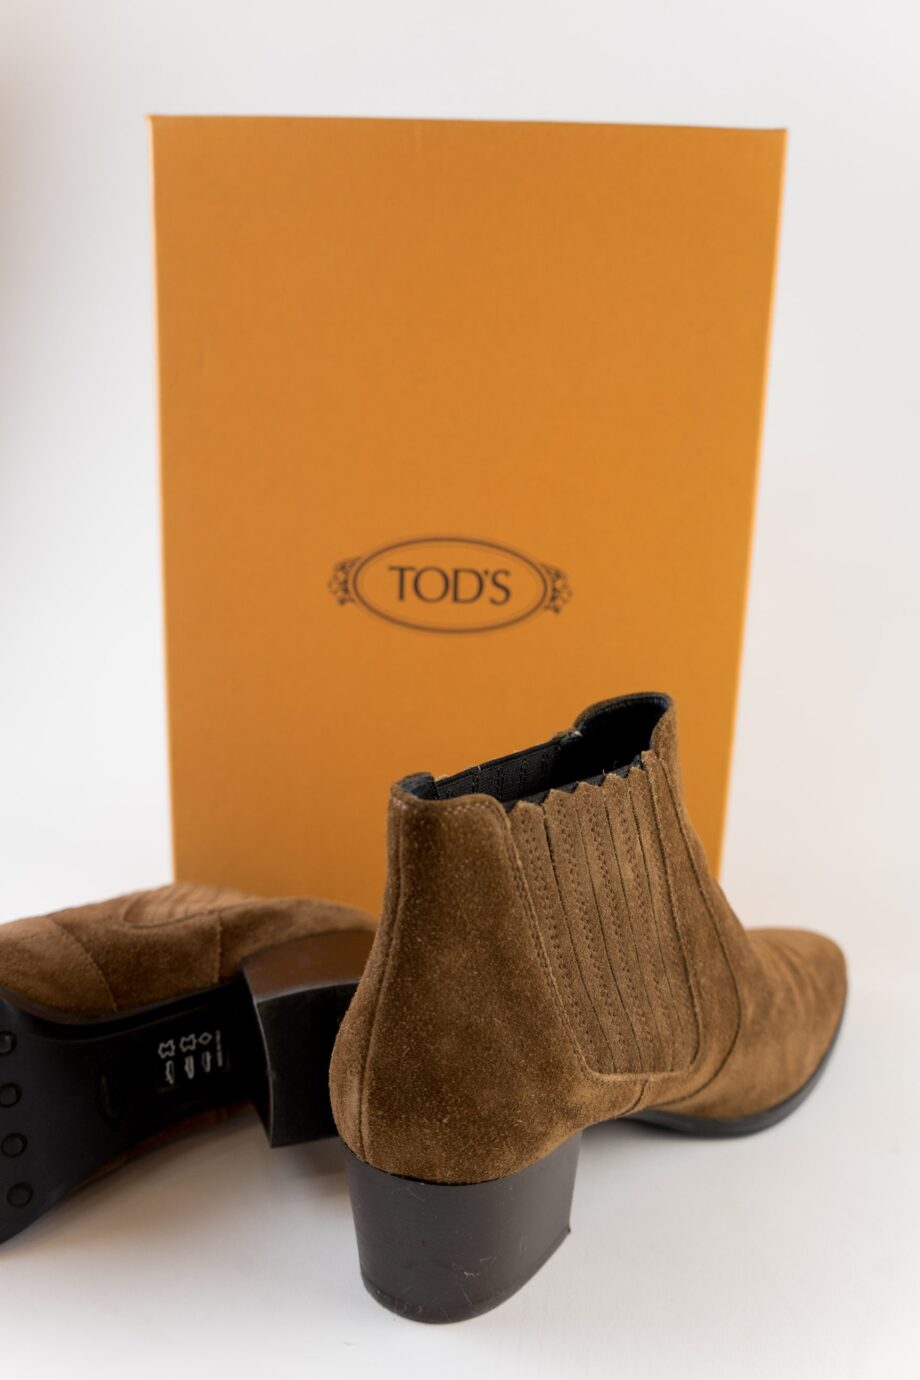 Pre-Loved Tod's boots with box